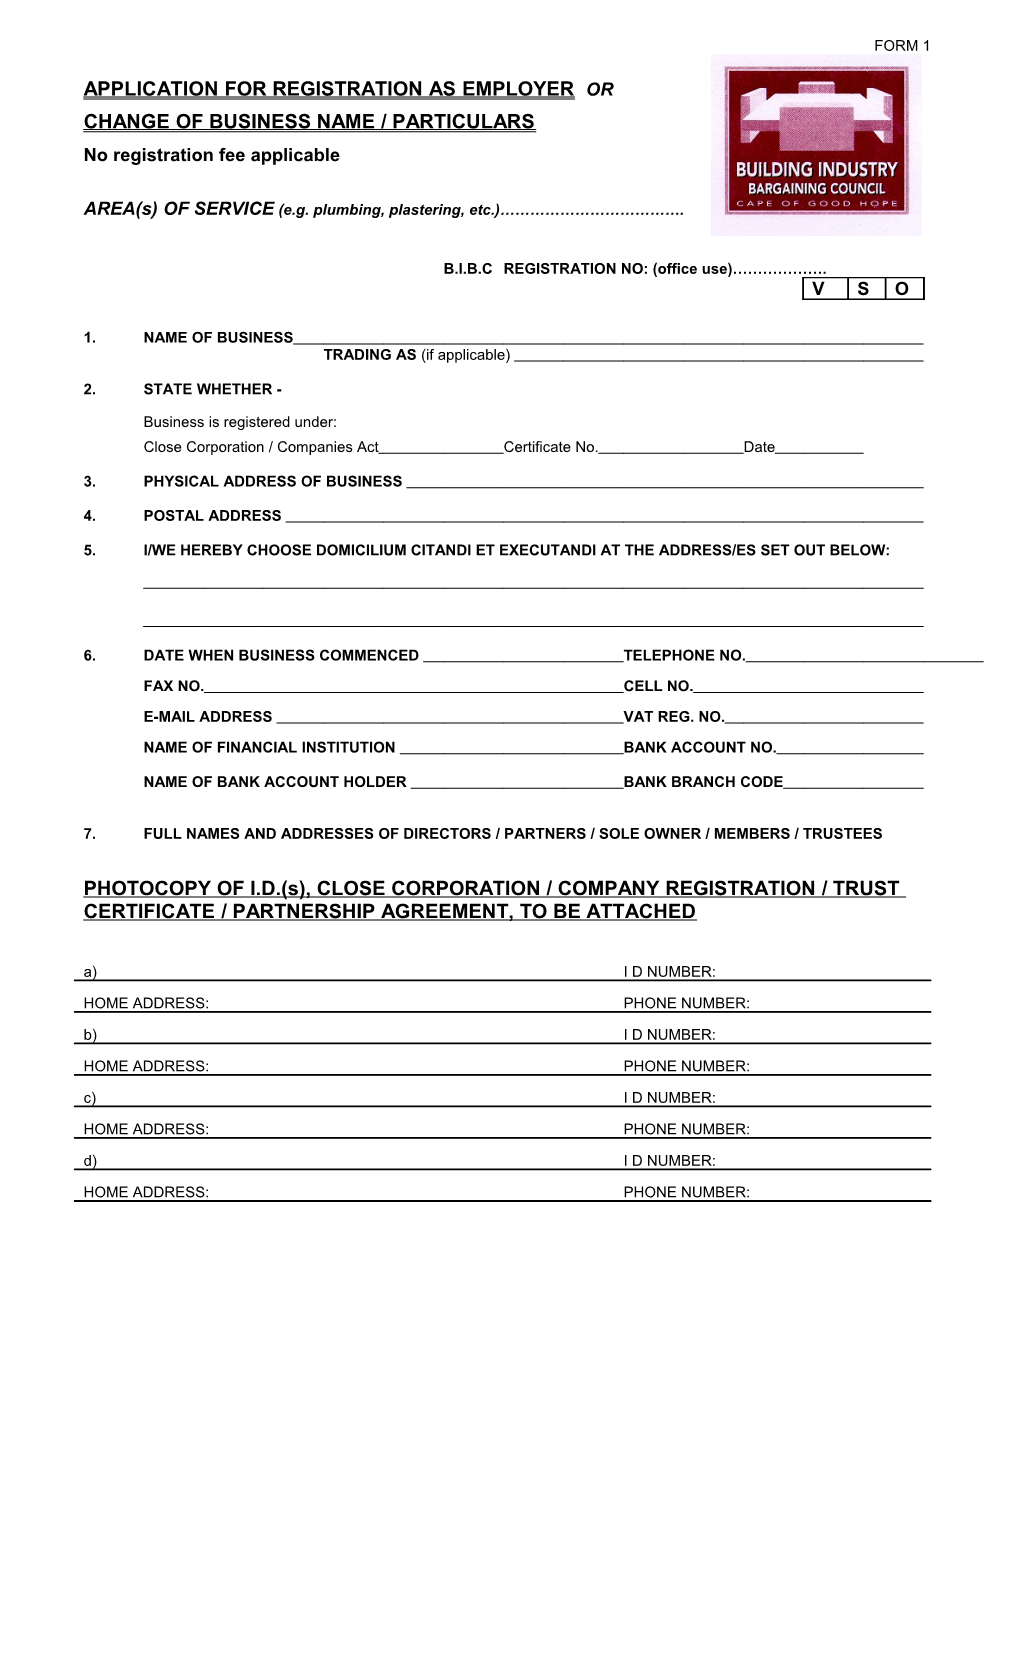 Application for Registration As Employer in the Building Industry Cape of Good Hope